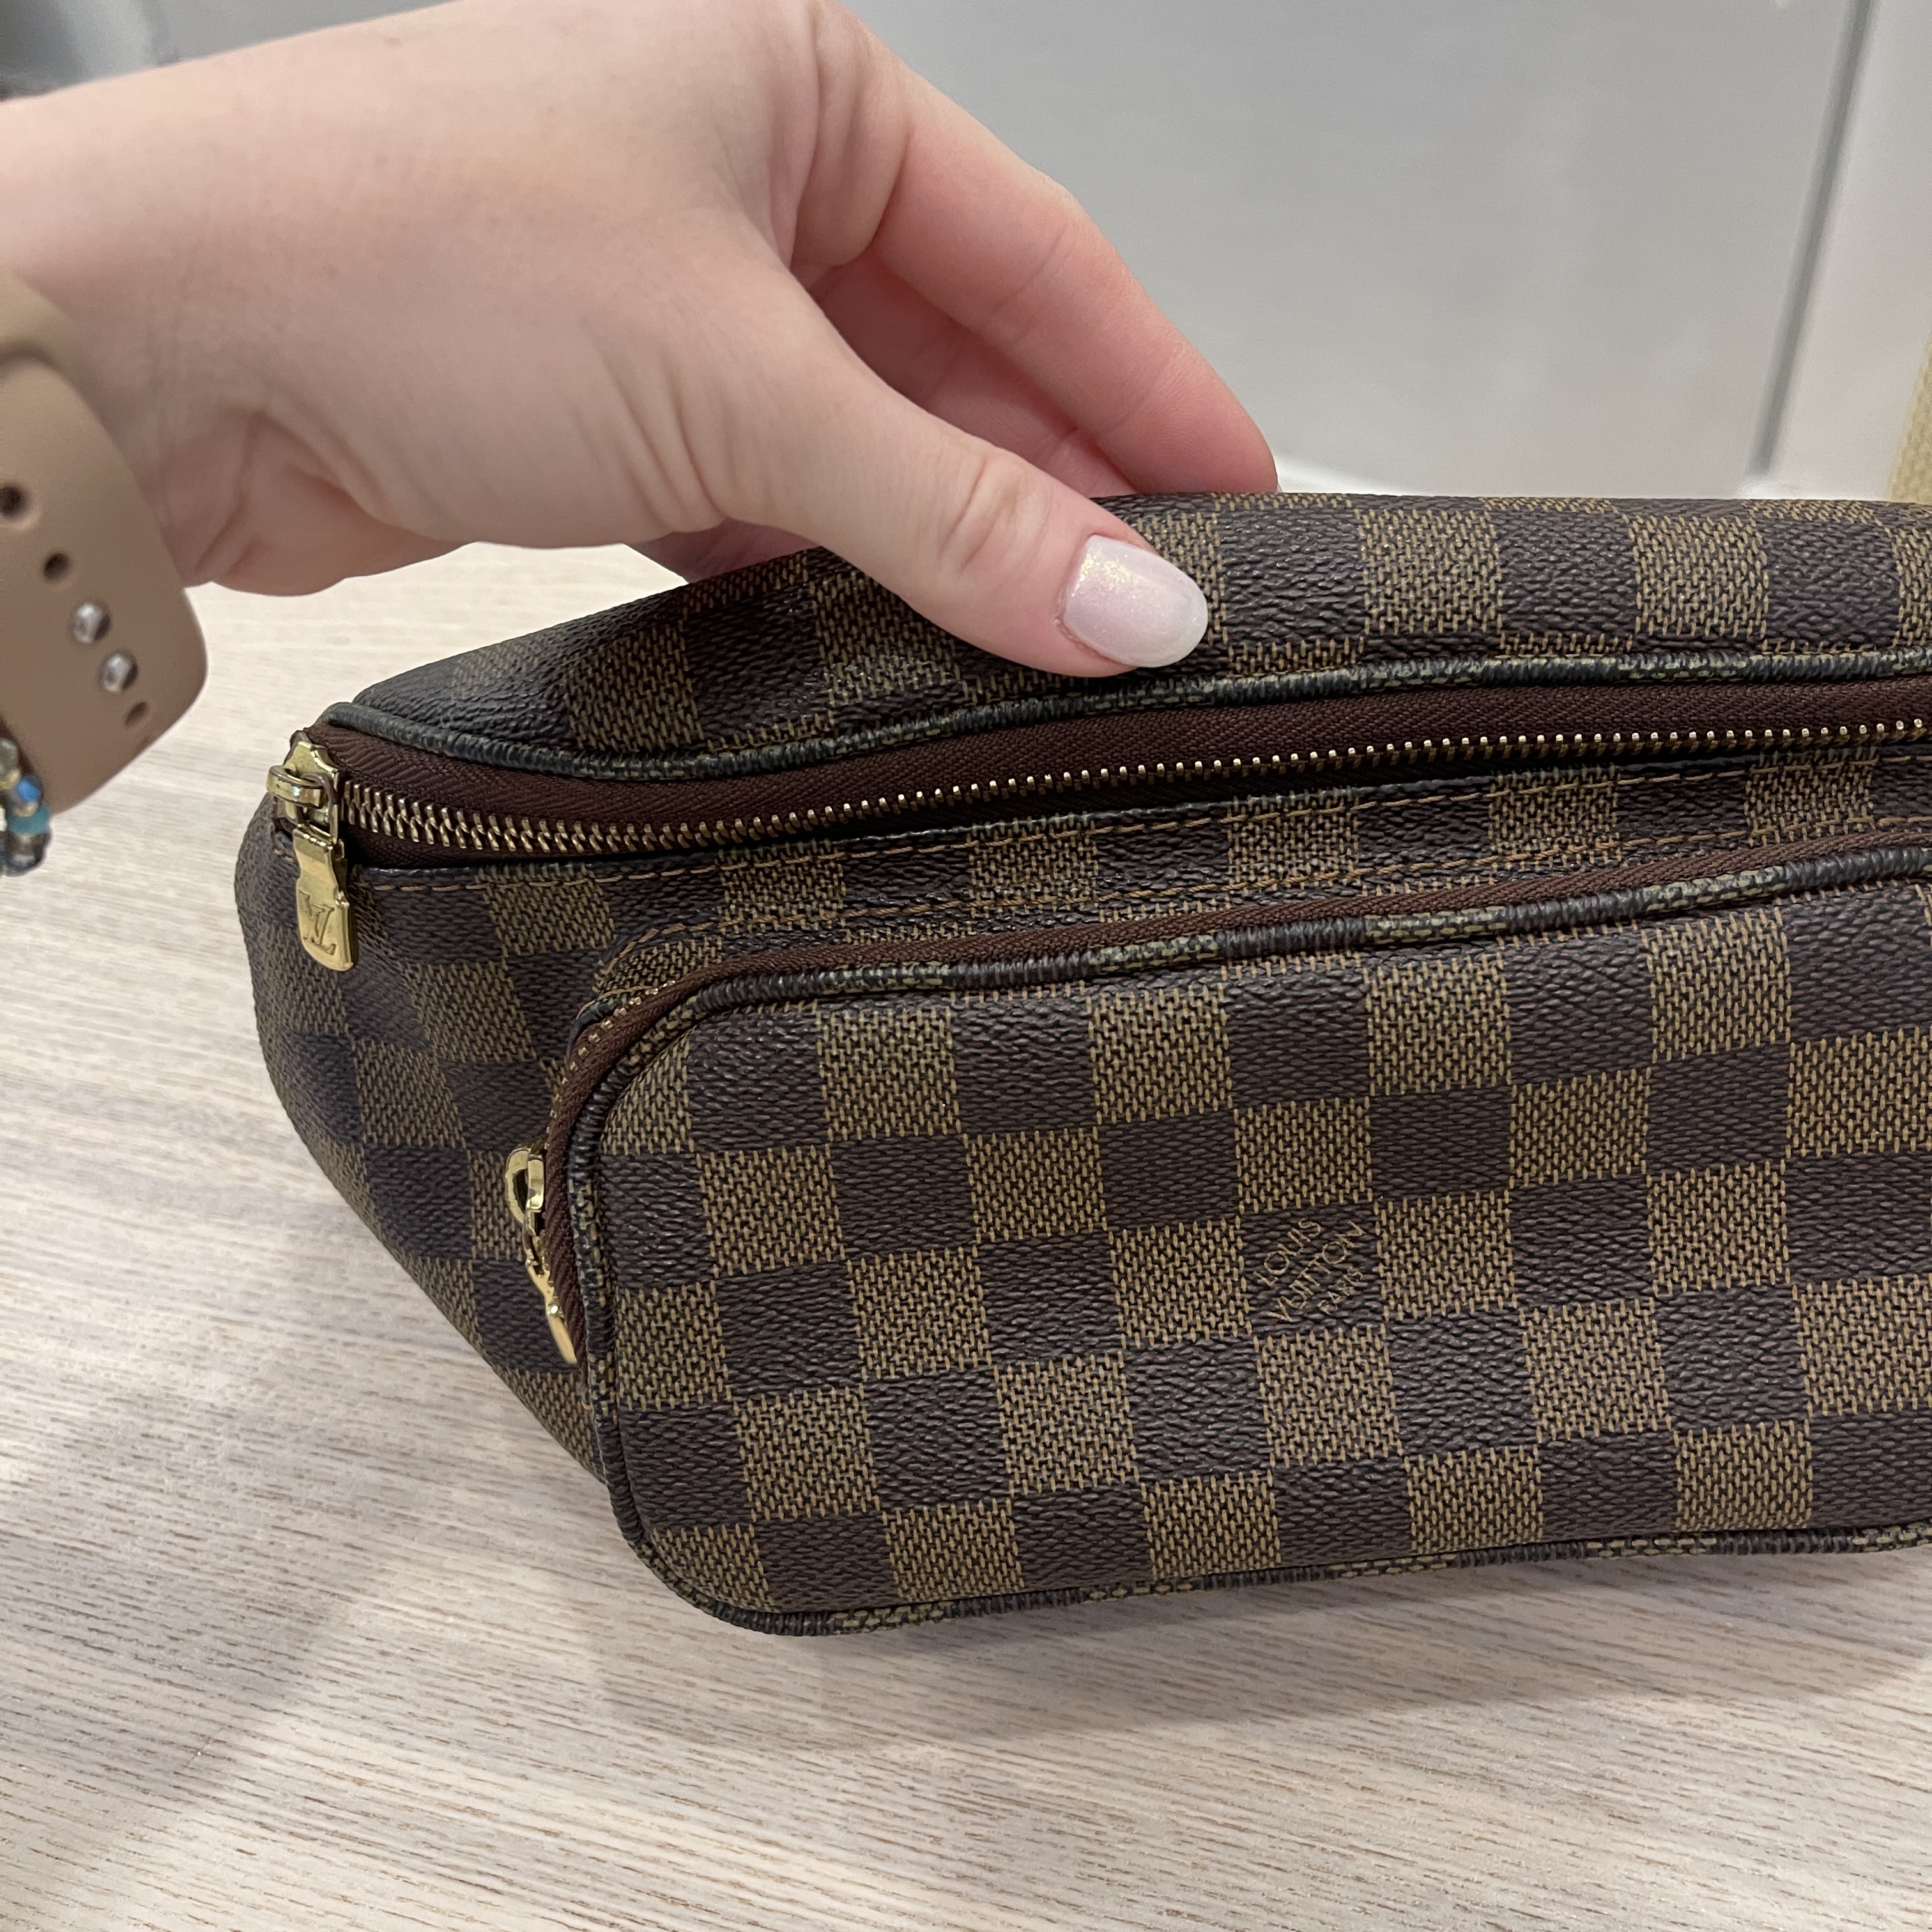 Buy [Used] LOUIS VUITTON Bum Bag Melville Body Bag Damier Leather Ebene  Brown N51172 from Japan - Buy authentic Plus exclusive items from Japan